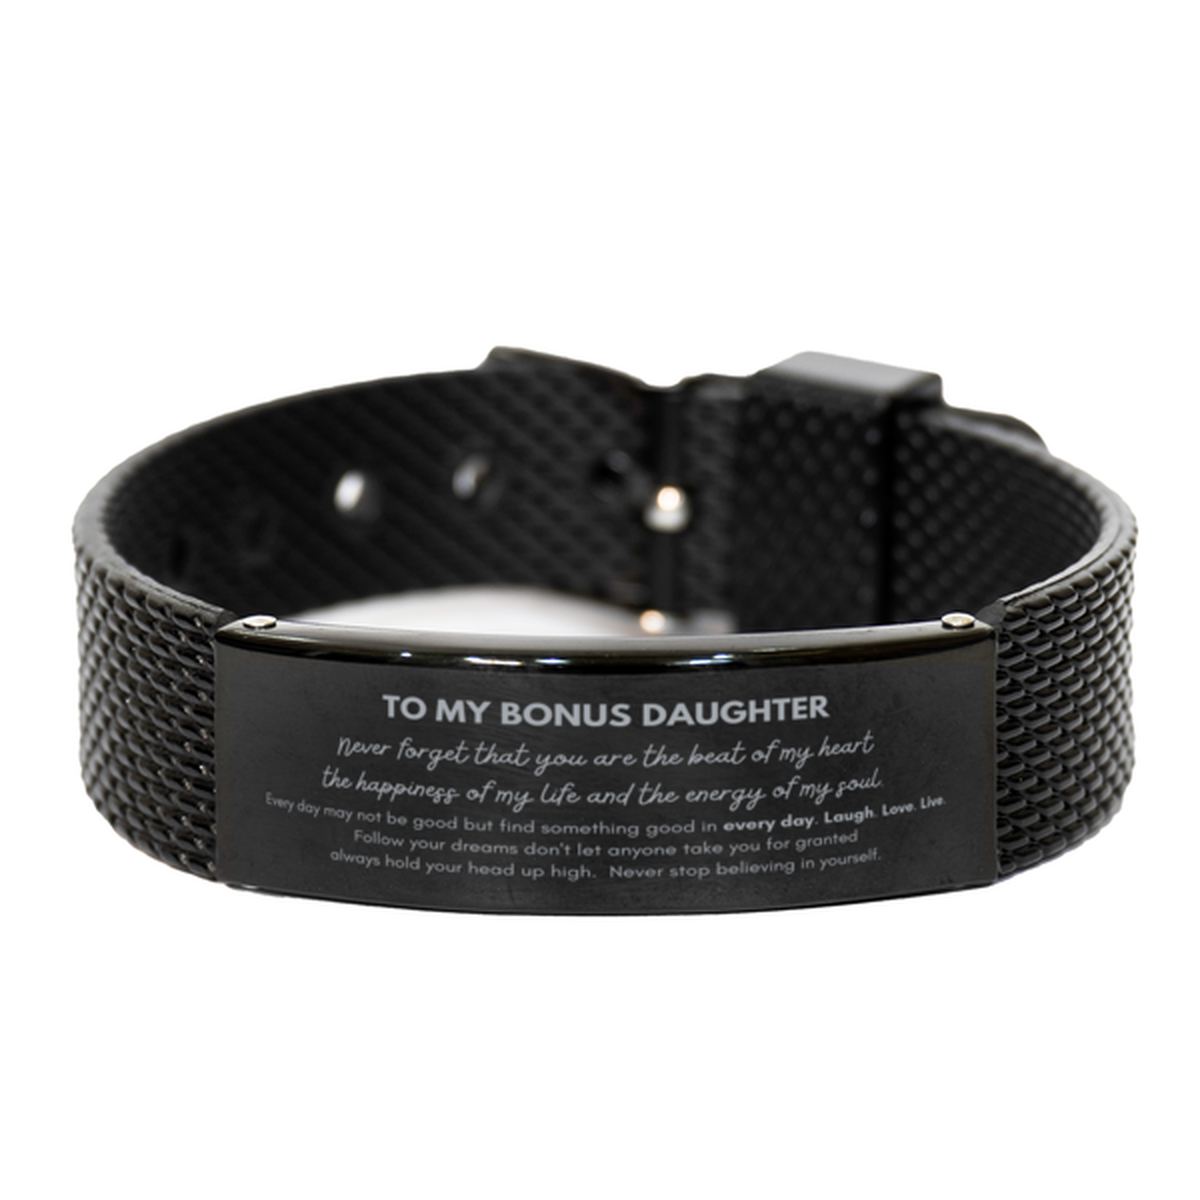 To My Bonus Daughter Bracelet Gifts, Christmas Bonus Daughter Black Shark Mesh Bracelet Present, Birthday Unique Motivational For Bonus Daughter, To My Bonus Daughter Never forget that you are the beat of my heart the happiness of my life and the energy o